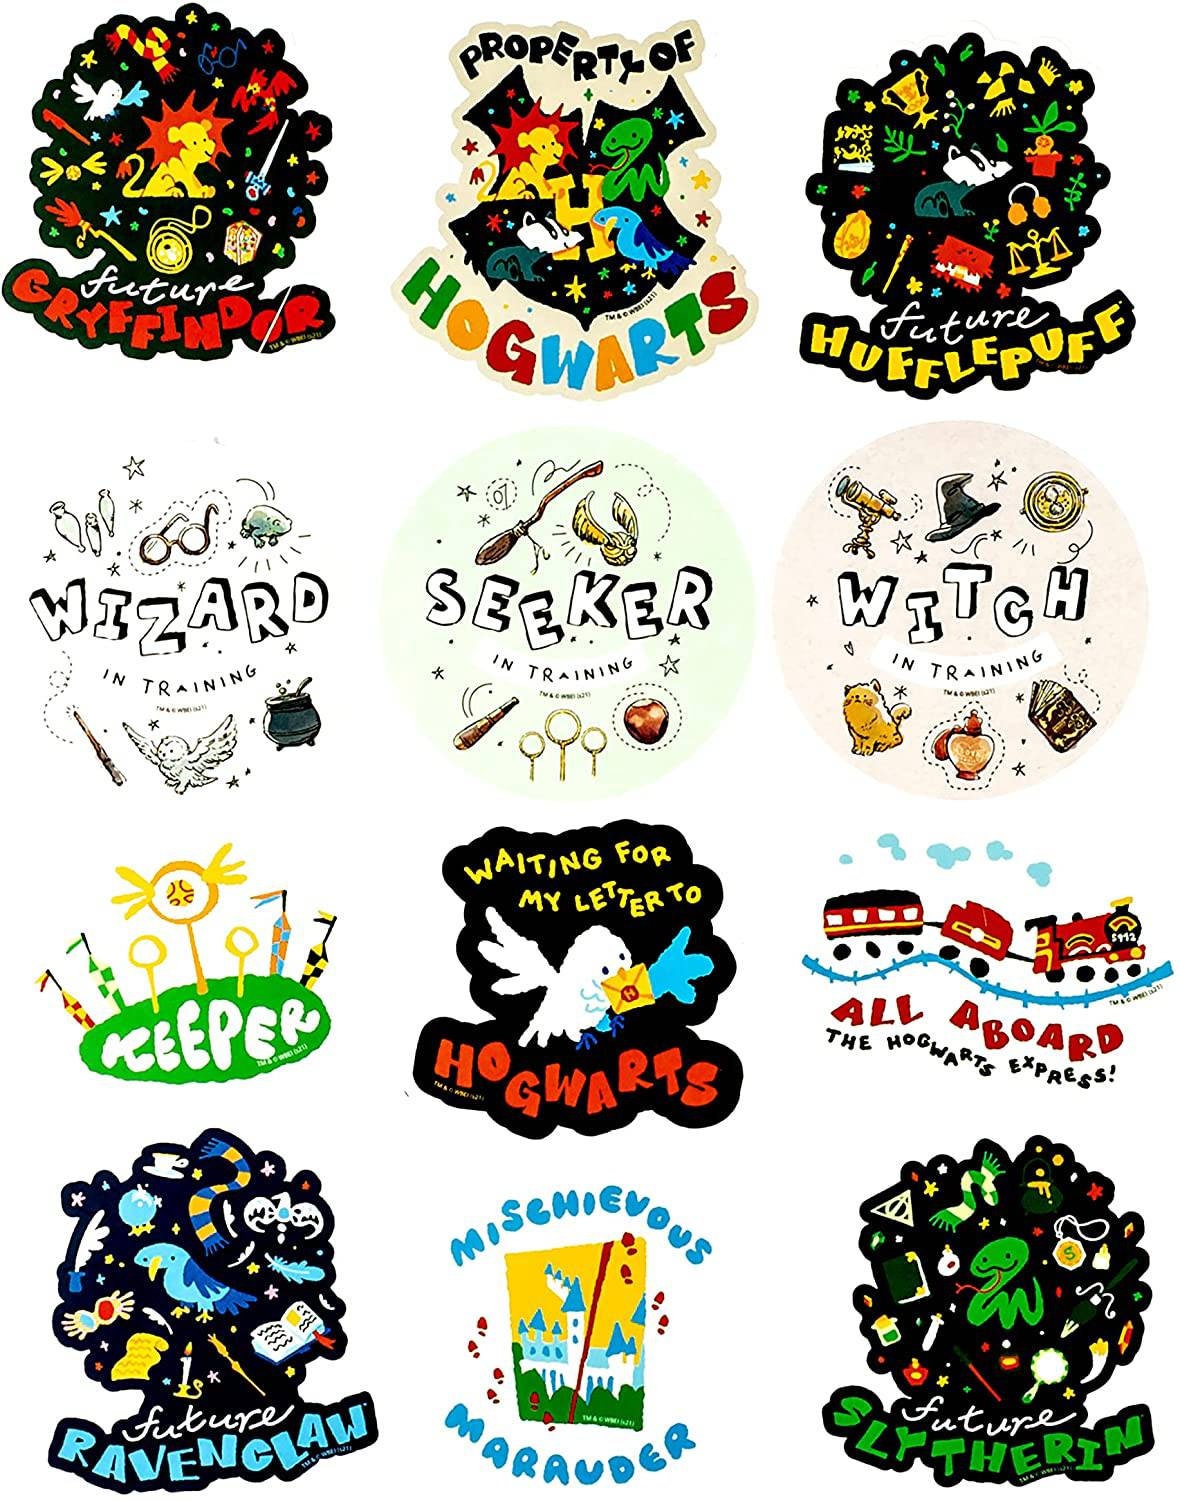 Crystal Witchy stickers, apothecary stickers, witch stickers